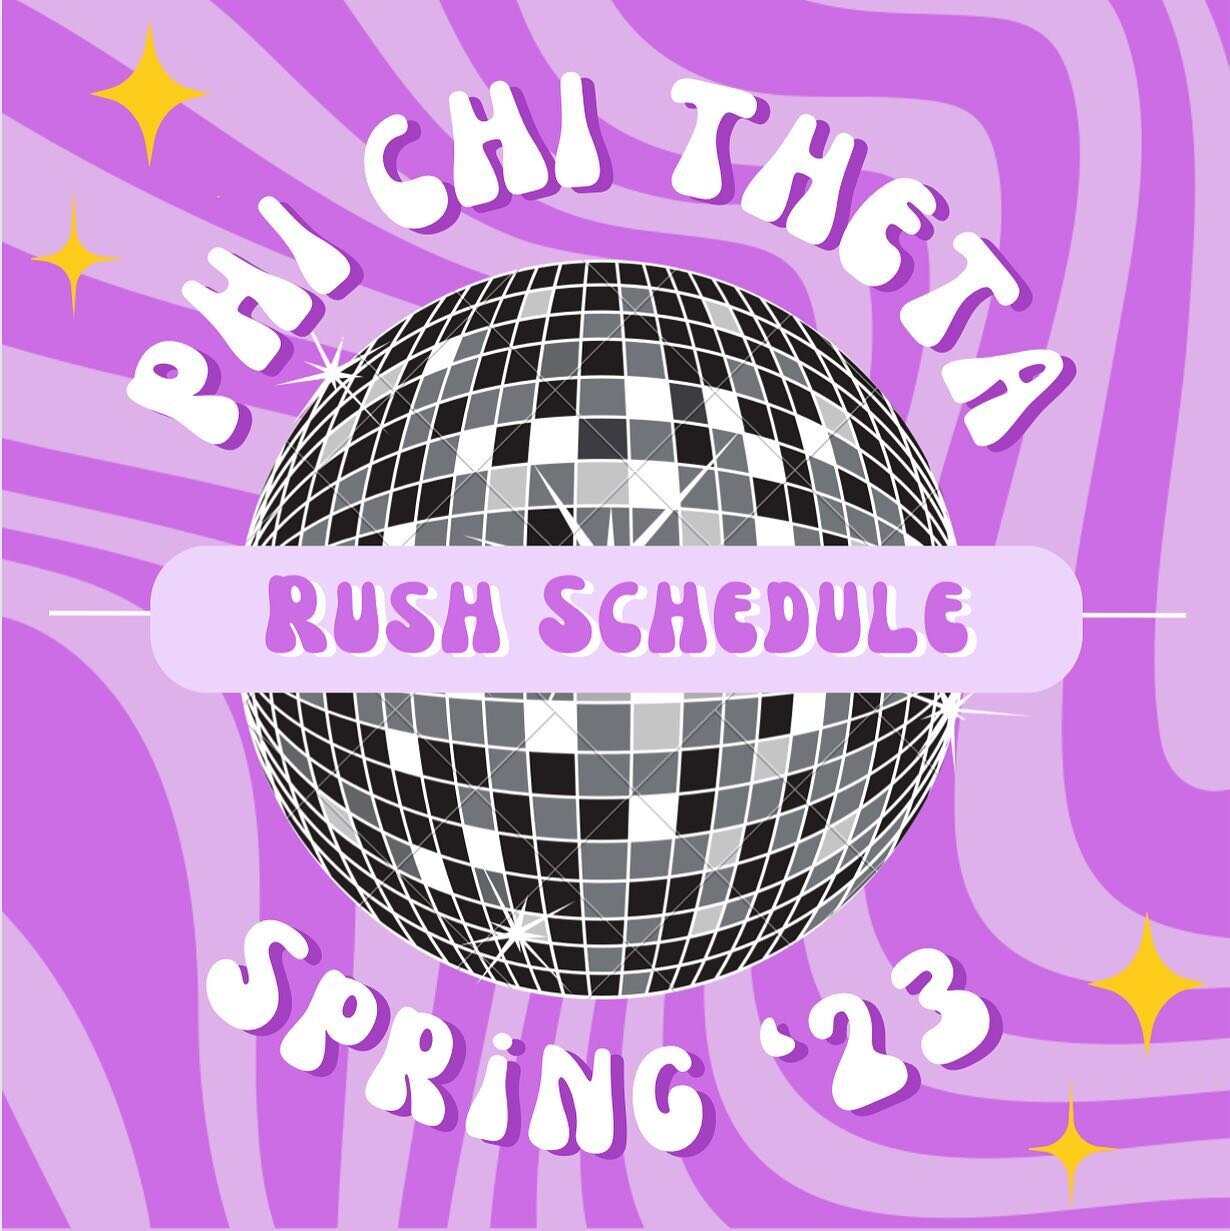 Welcome back everyone! Get groovy and rush Phi Chi Theta this spring🕺🪩Join the GroupMe linked in the bio for more information/updates :)